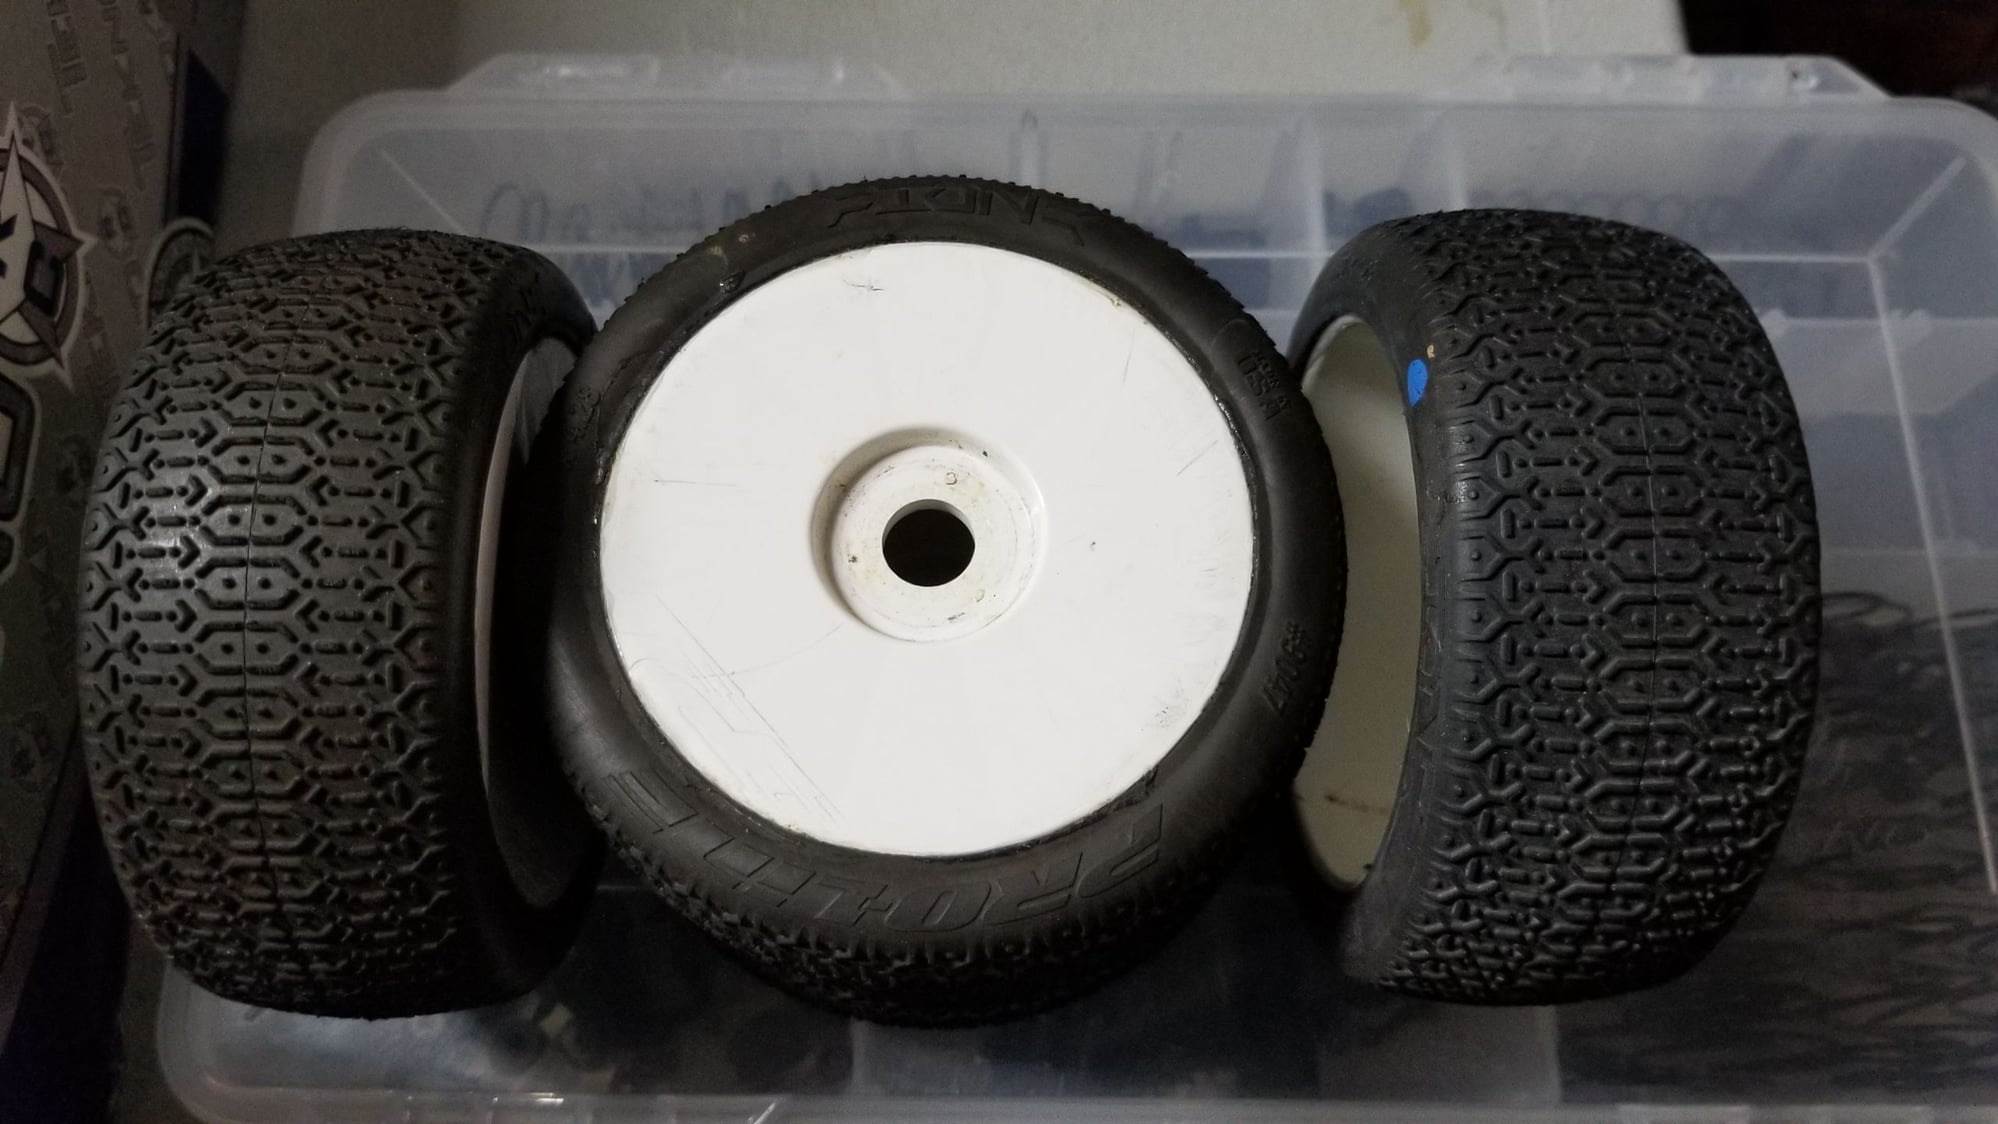 F/S Tekno EB48.2 Roller with Spares - R/C Tech Forums